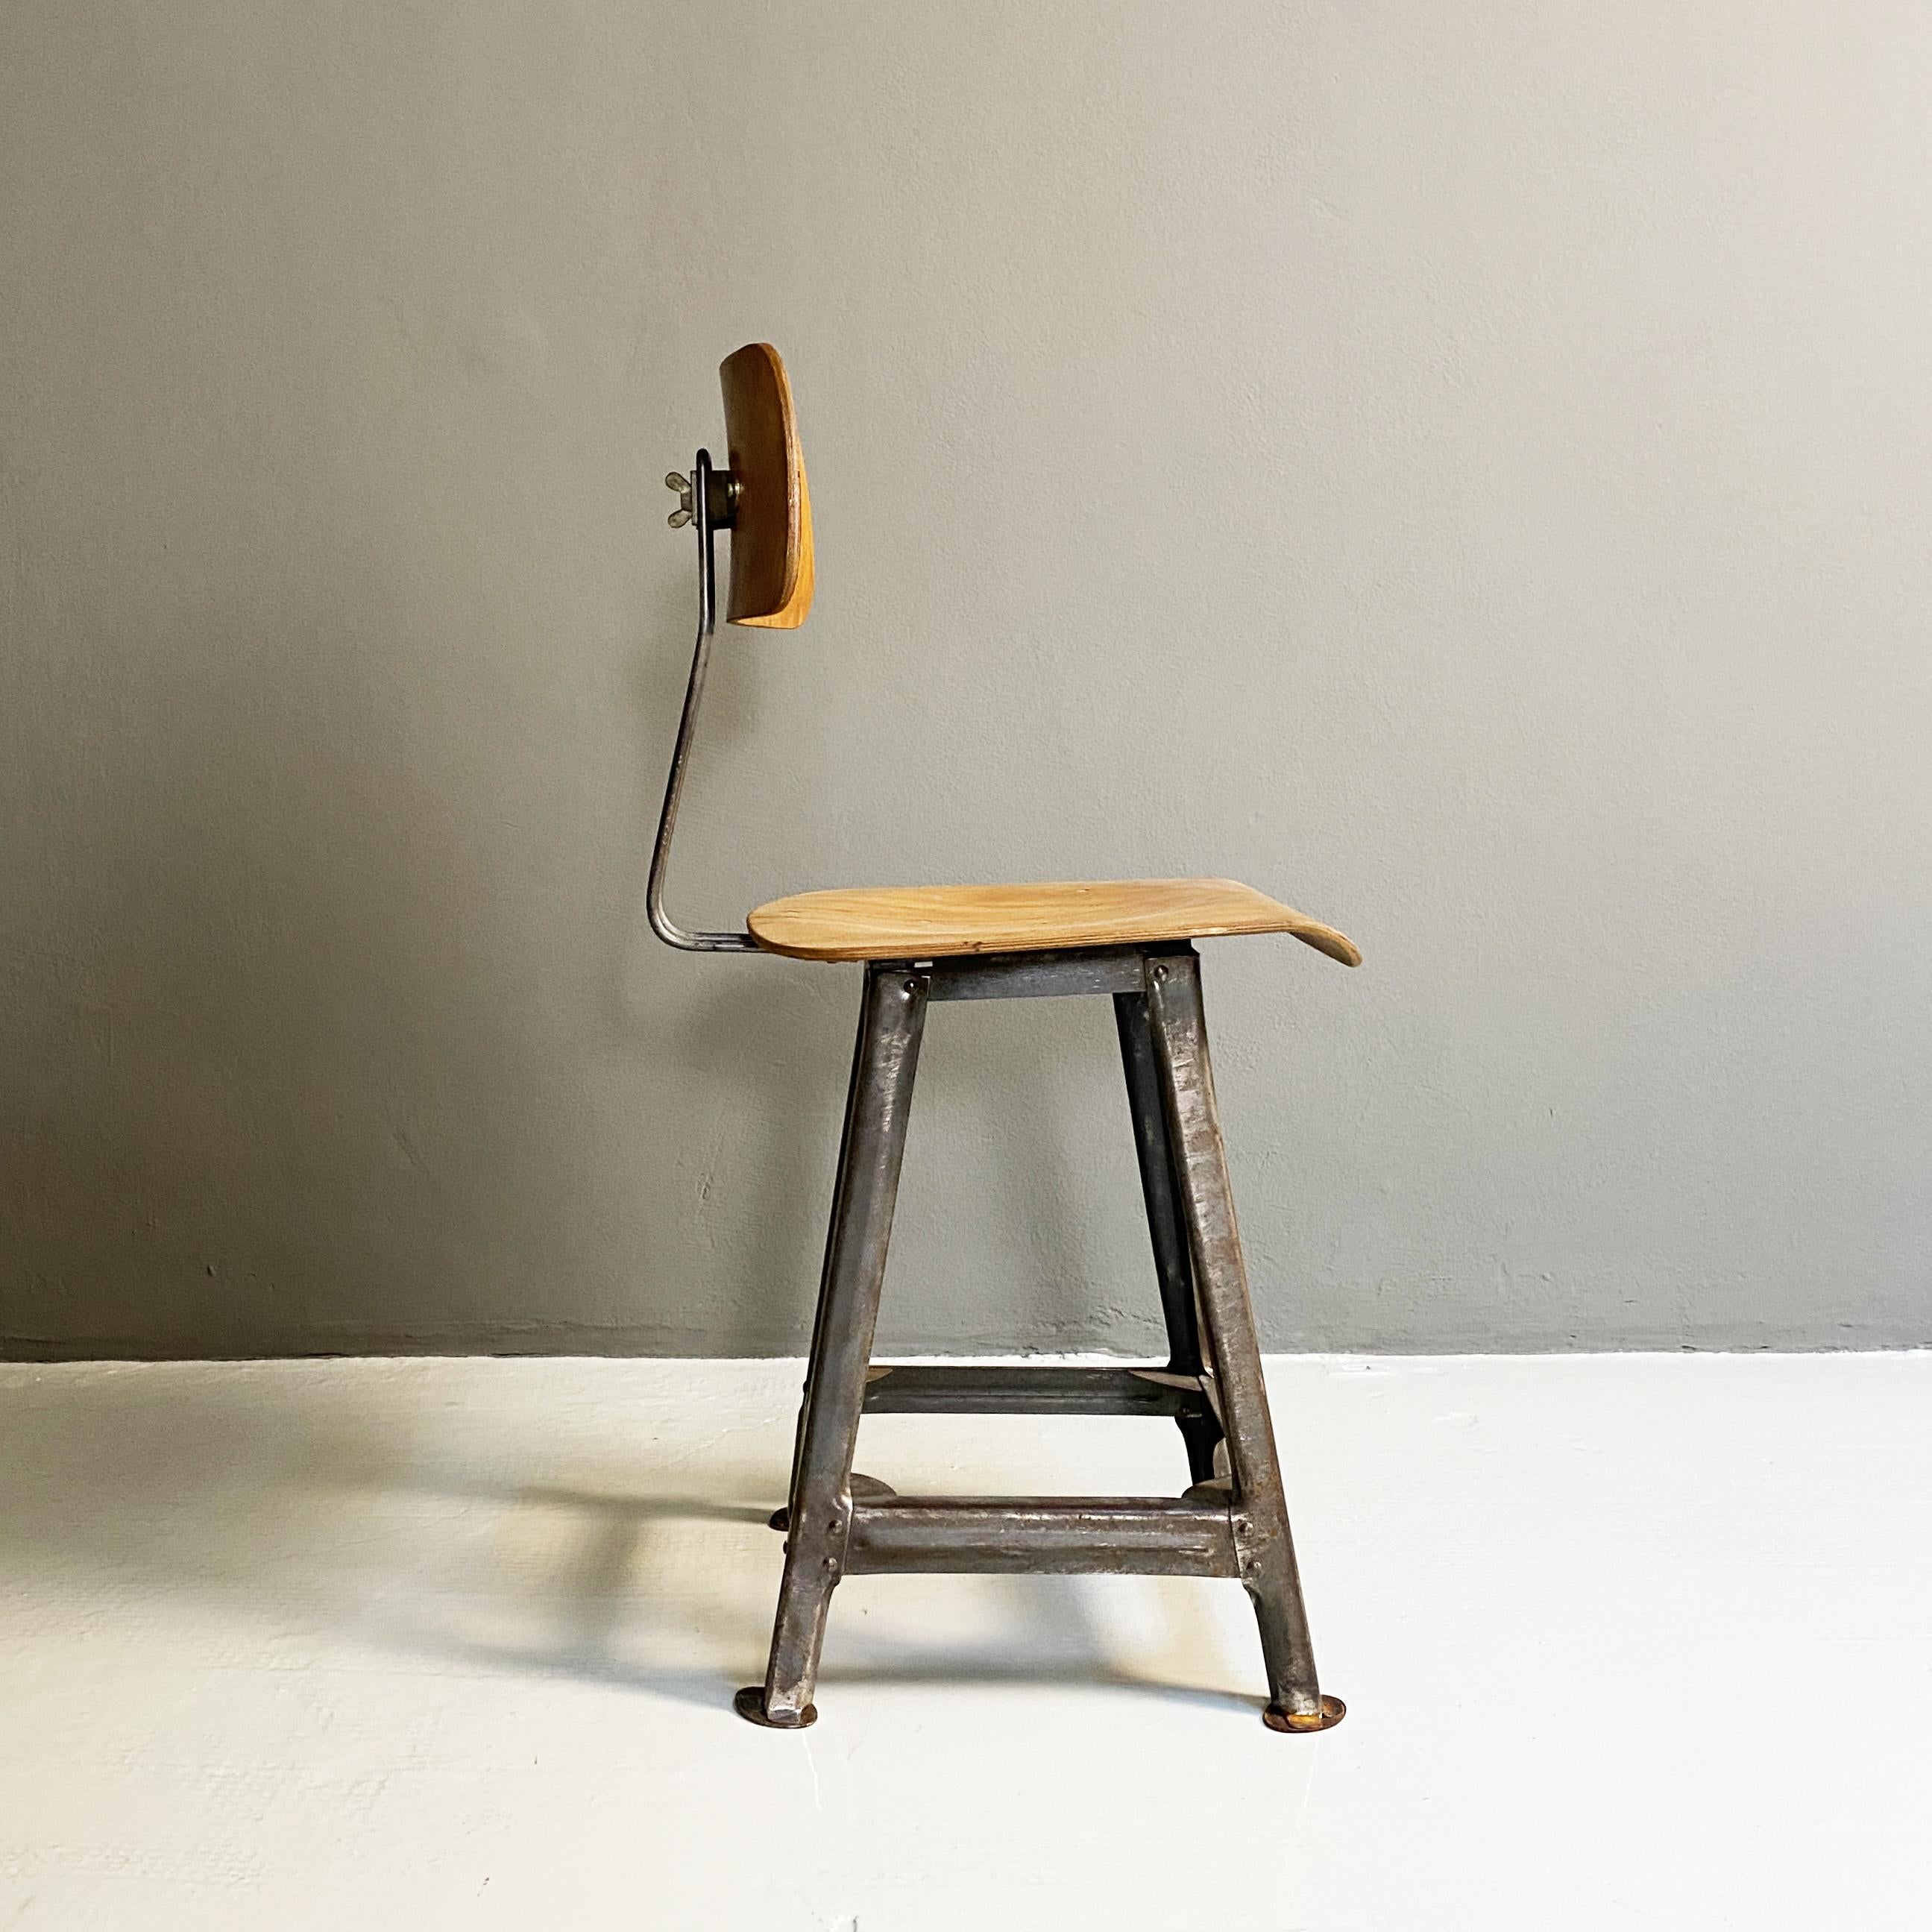 German Industrial Wood and Metal Chair, 1930s For Sale 1